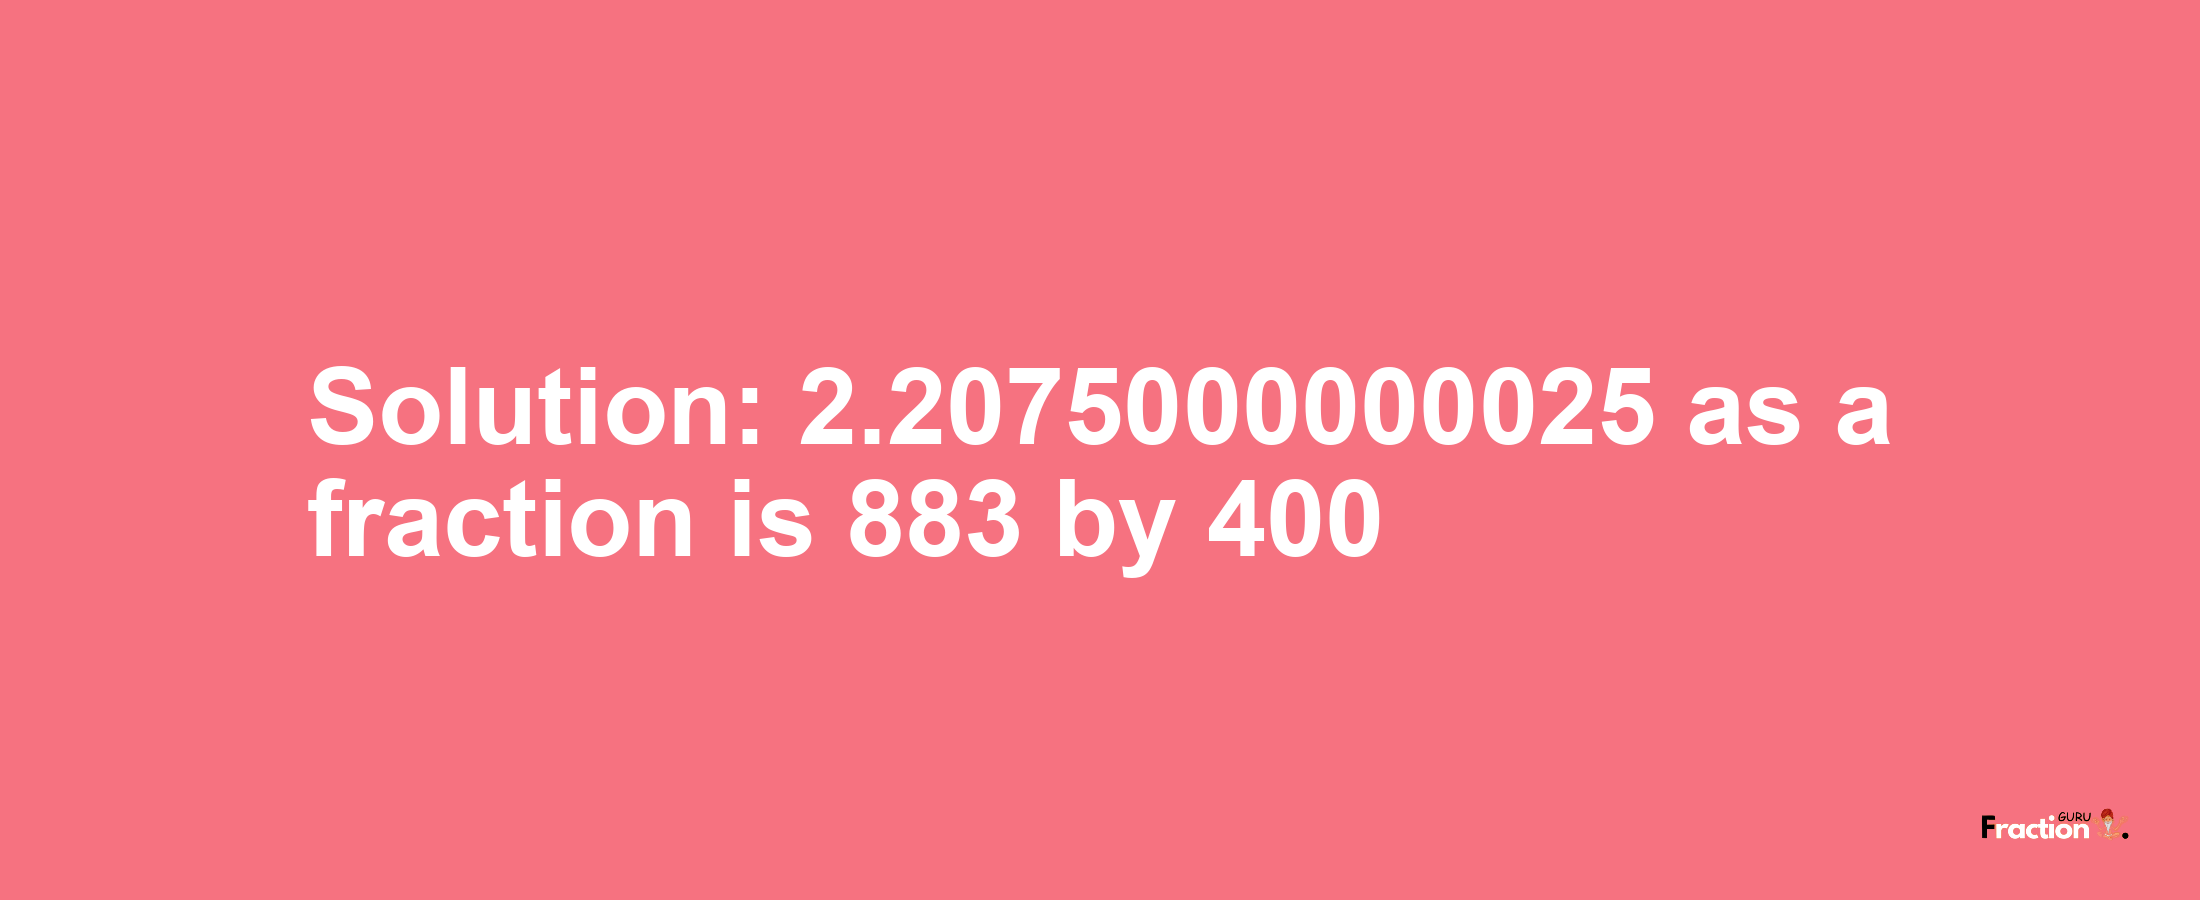 Solution:2.2075000000025 as a fraction is 883/400